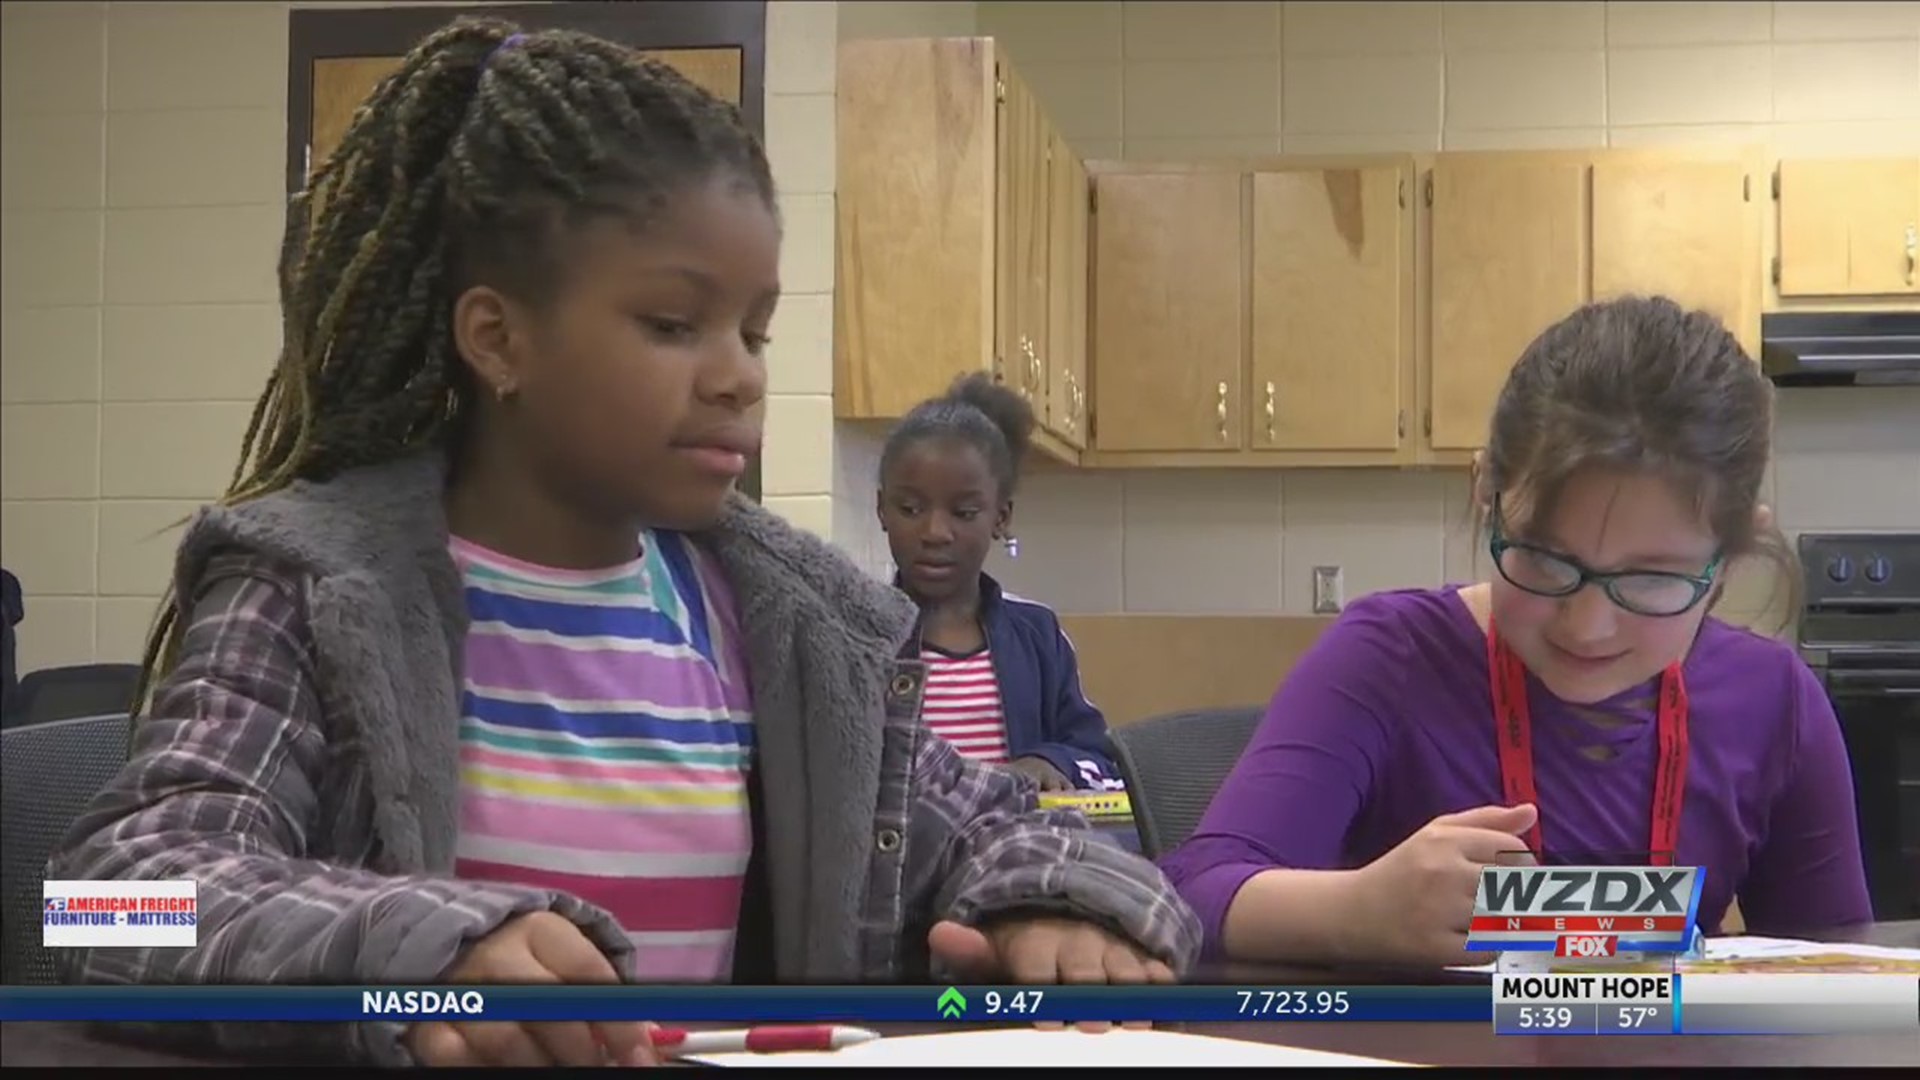 The Boys and Girls Club of North Alabama held a one-day conference to teach young girls the importance of STEM-related careers.